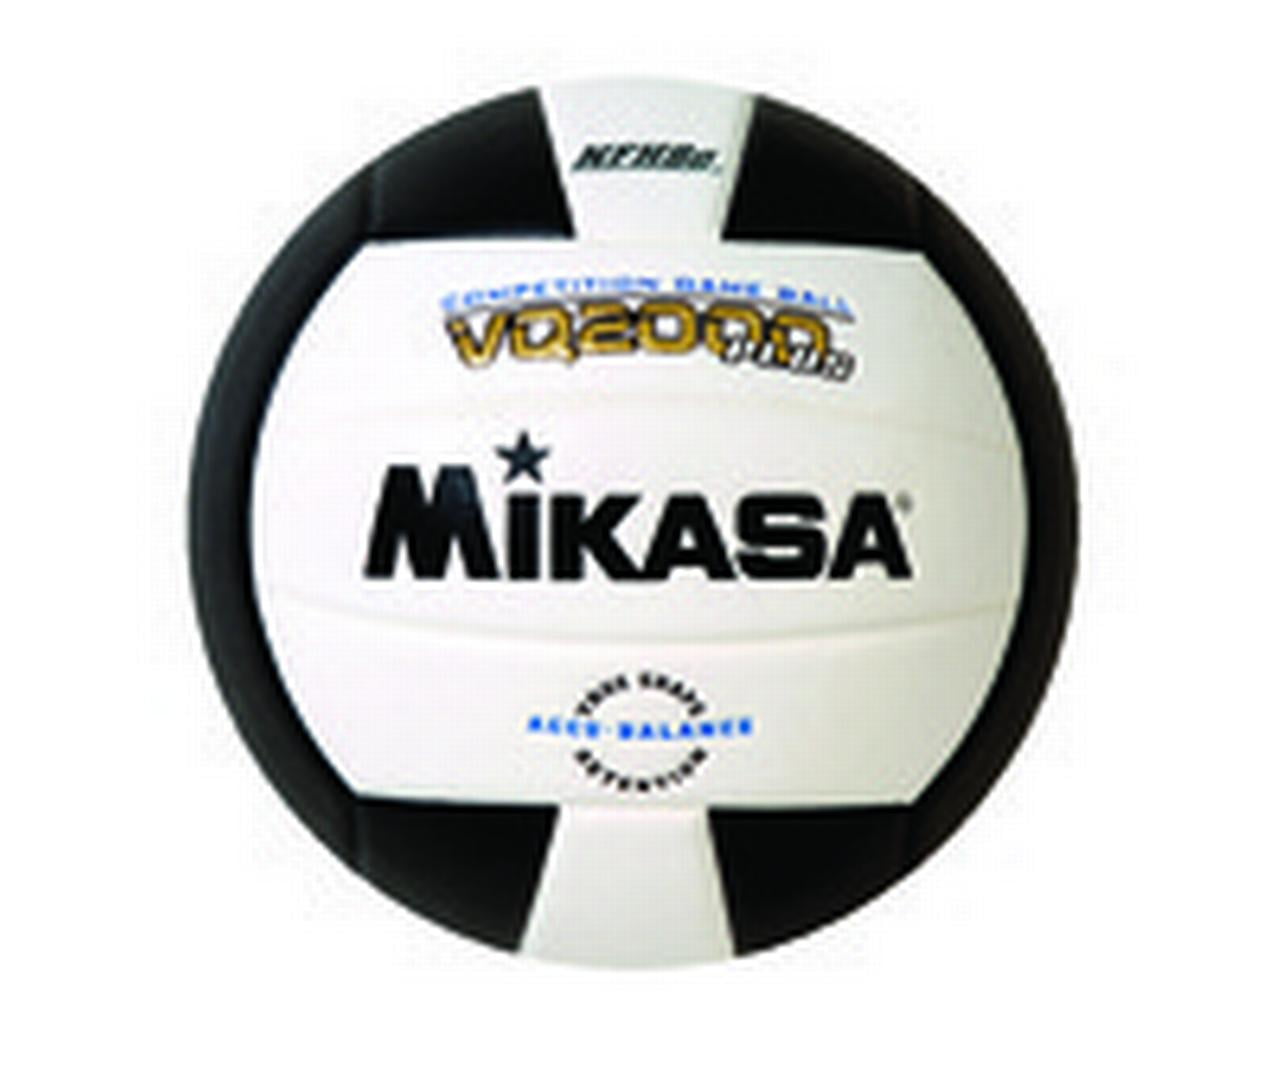 Mikasa Volleyball VQ2000-USA Competition Game Ball NFHS Approved Official Size 5 